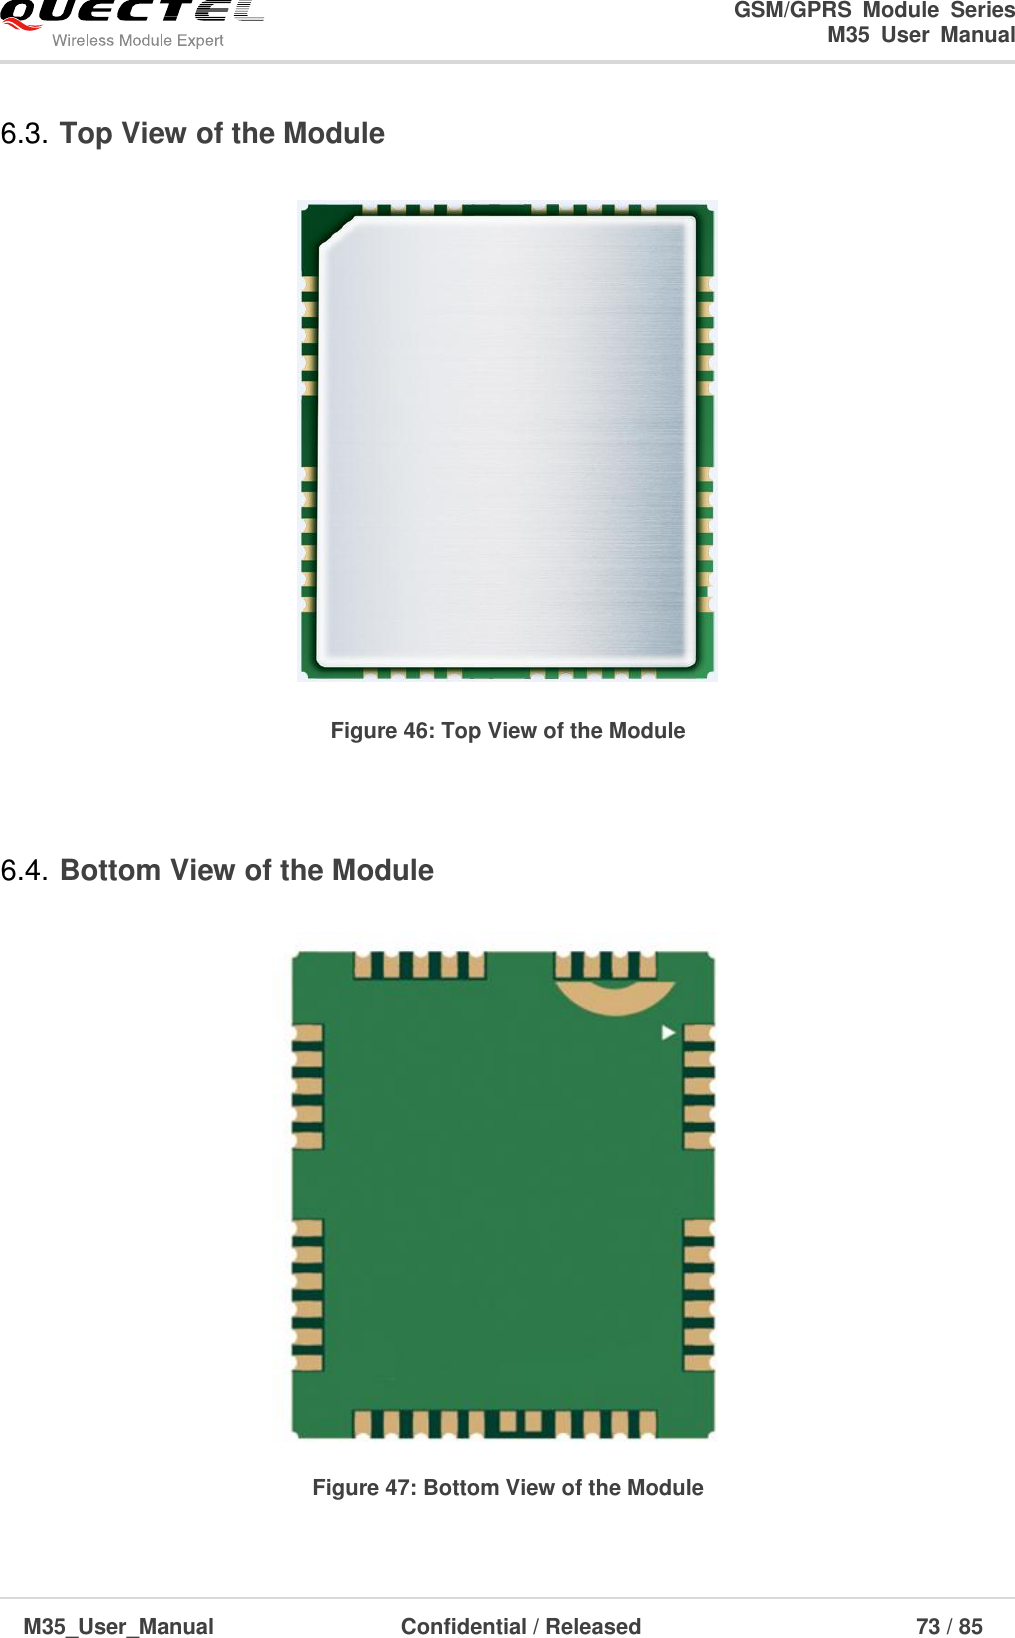                                                                              GSM/GPRS  Module  Series                                                                 M35  User  Manual  M35_User_Manual                                  Confidential / Released                             73 / 85    6.3. Top View of the Module   Figure 46: Top View of the Module  6.4. Bottom View of the Module  Figure 47: Bottom View of the Module 